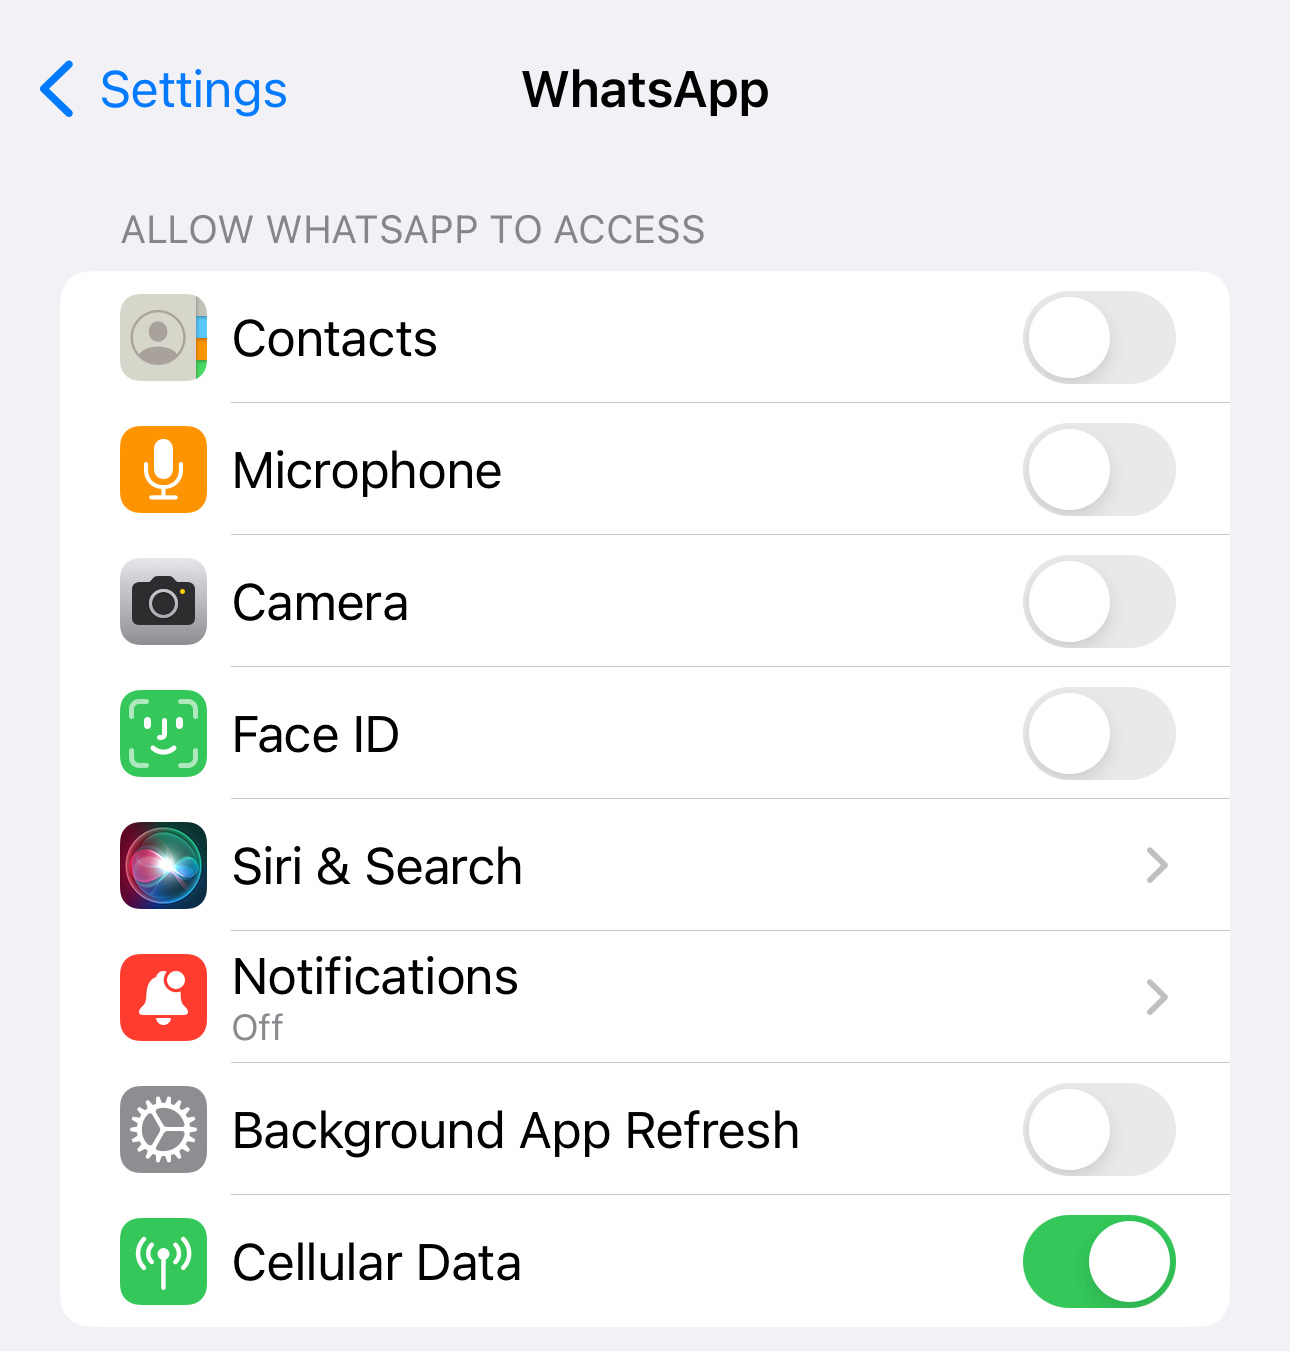 Step-by-Step Guide: How to Stop WhatsApp from Using Your Microphone in the Background